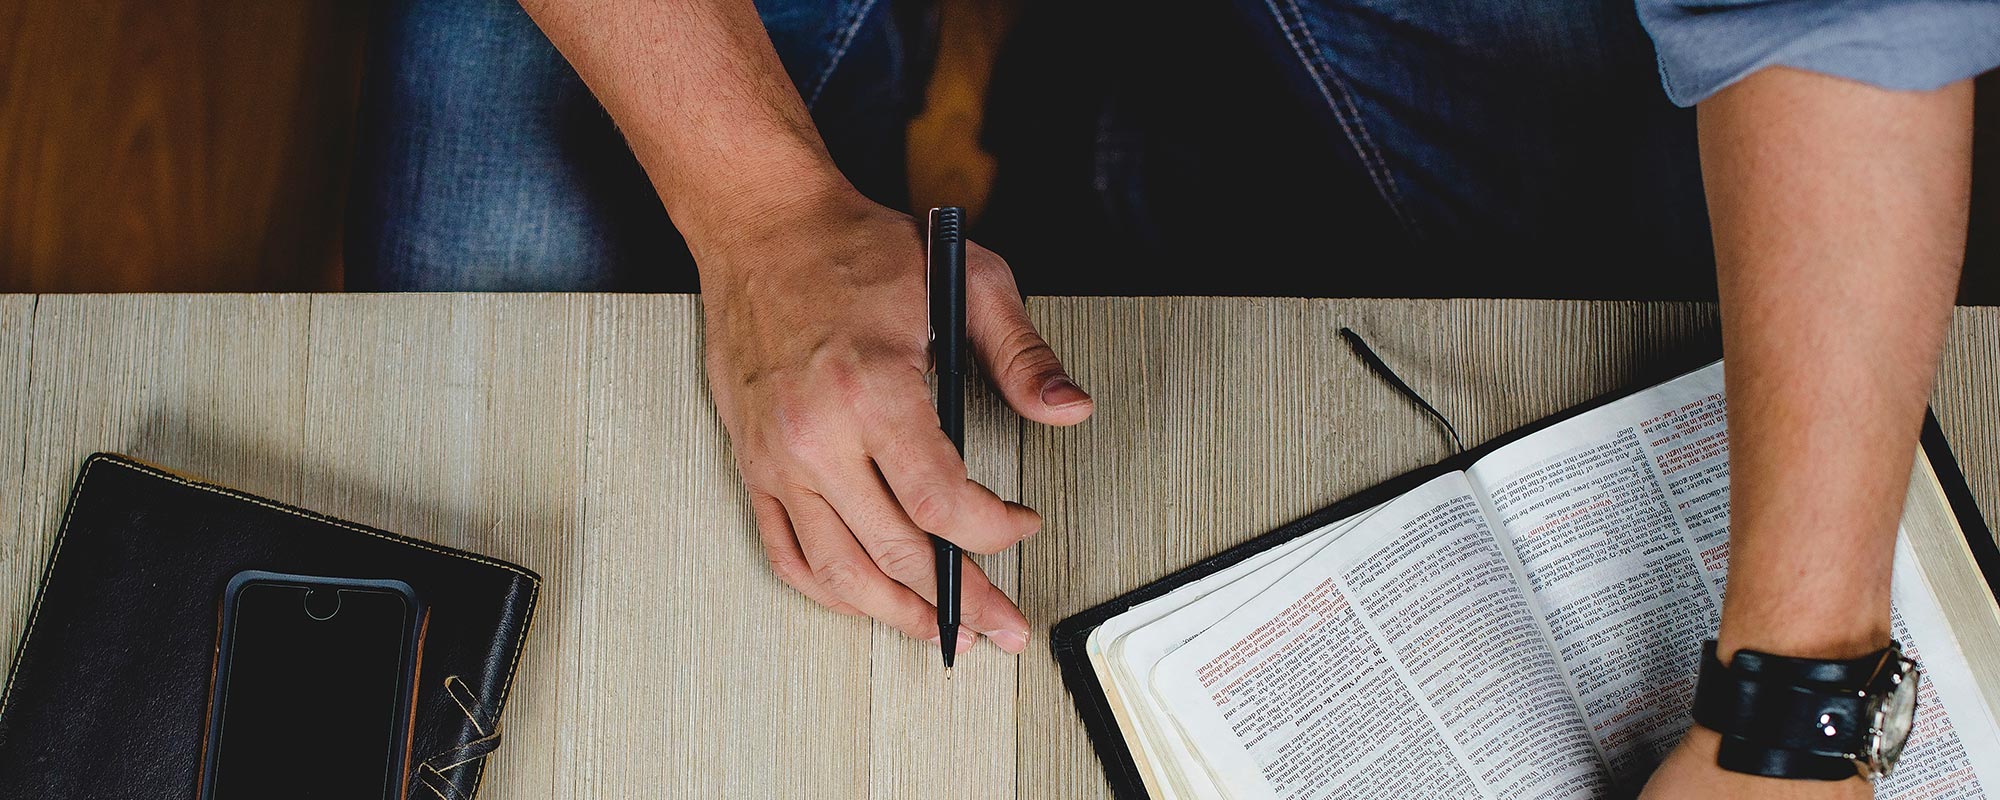 Search for Various Bible Study Lessons